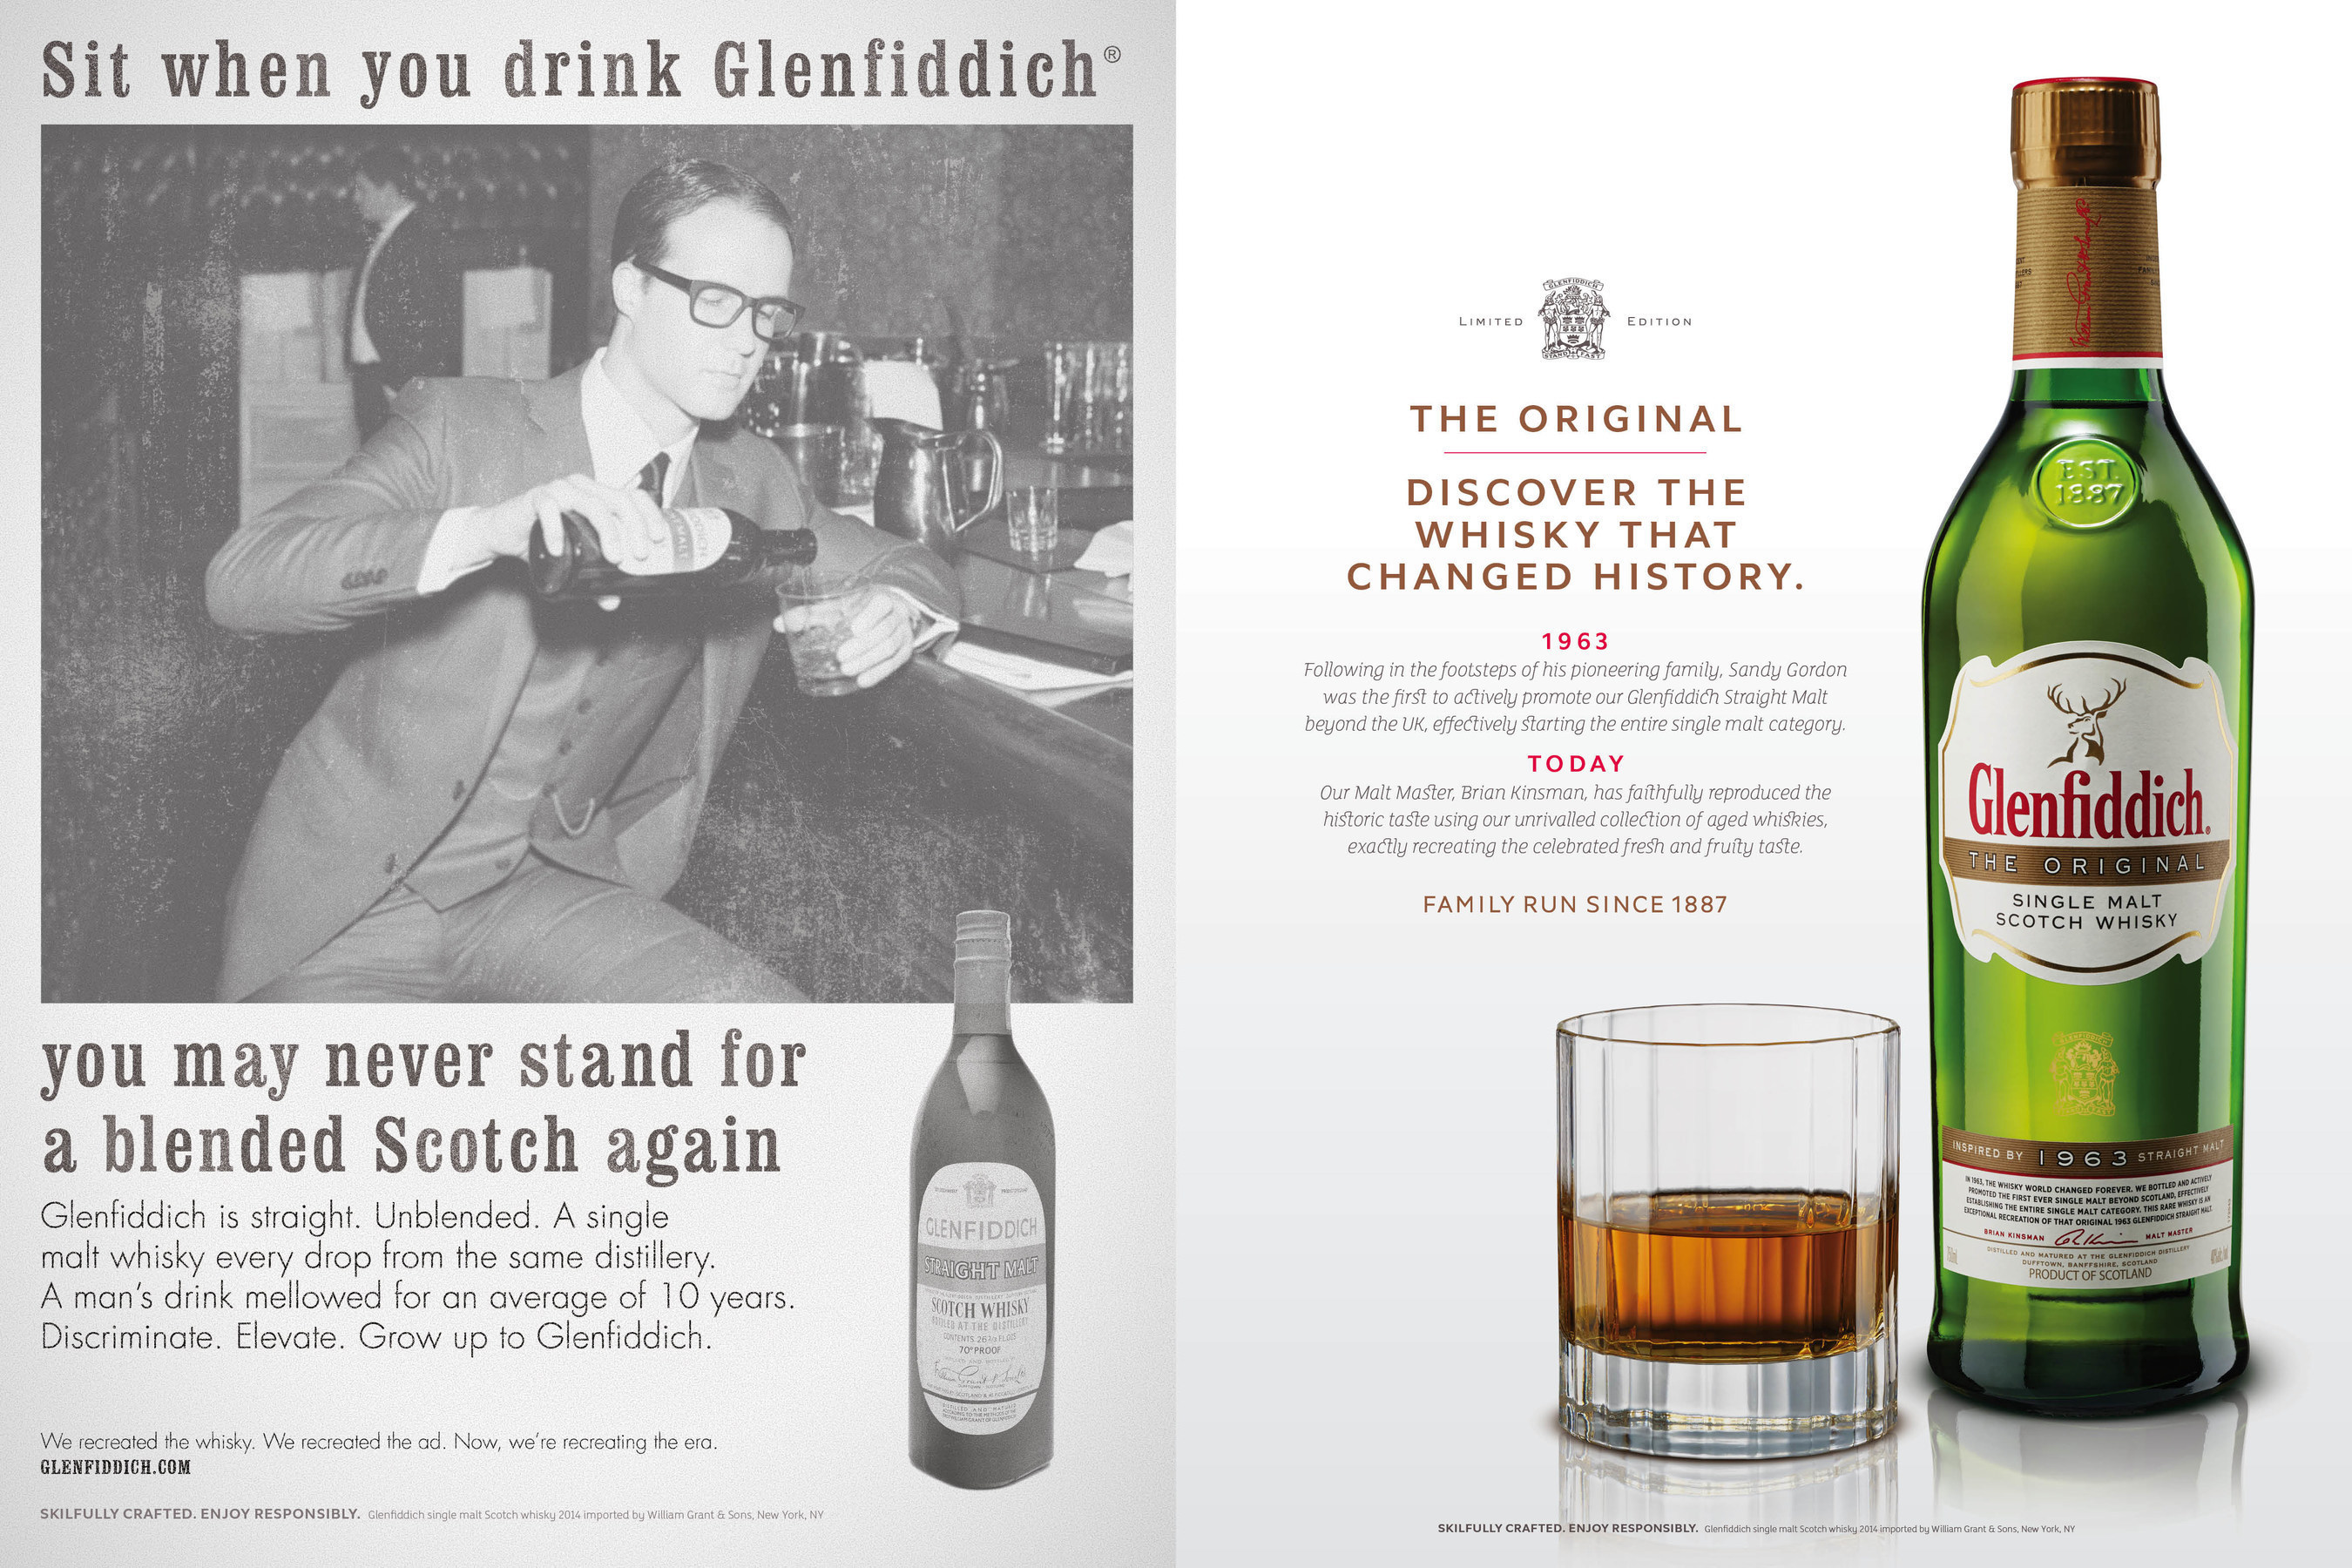 "Glenfiddich The Original: a unique whisky expression produced to celebrate the distiller's 1963 Straight Malt. Recipe re-created by Malt Master Brian Kinsman from the original Glenfiddich ledger notations."